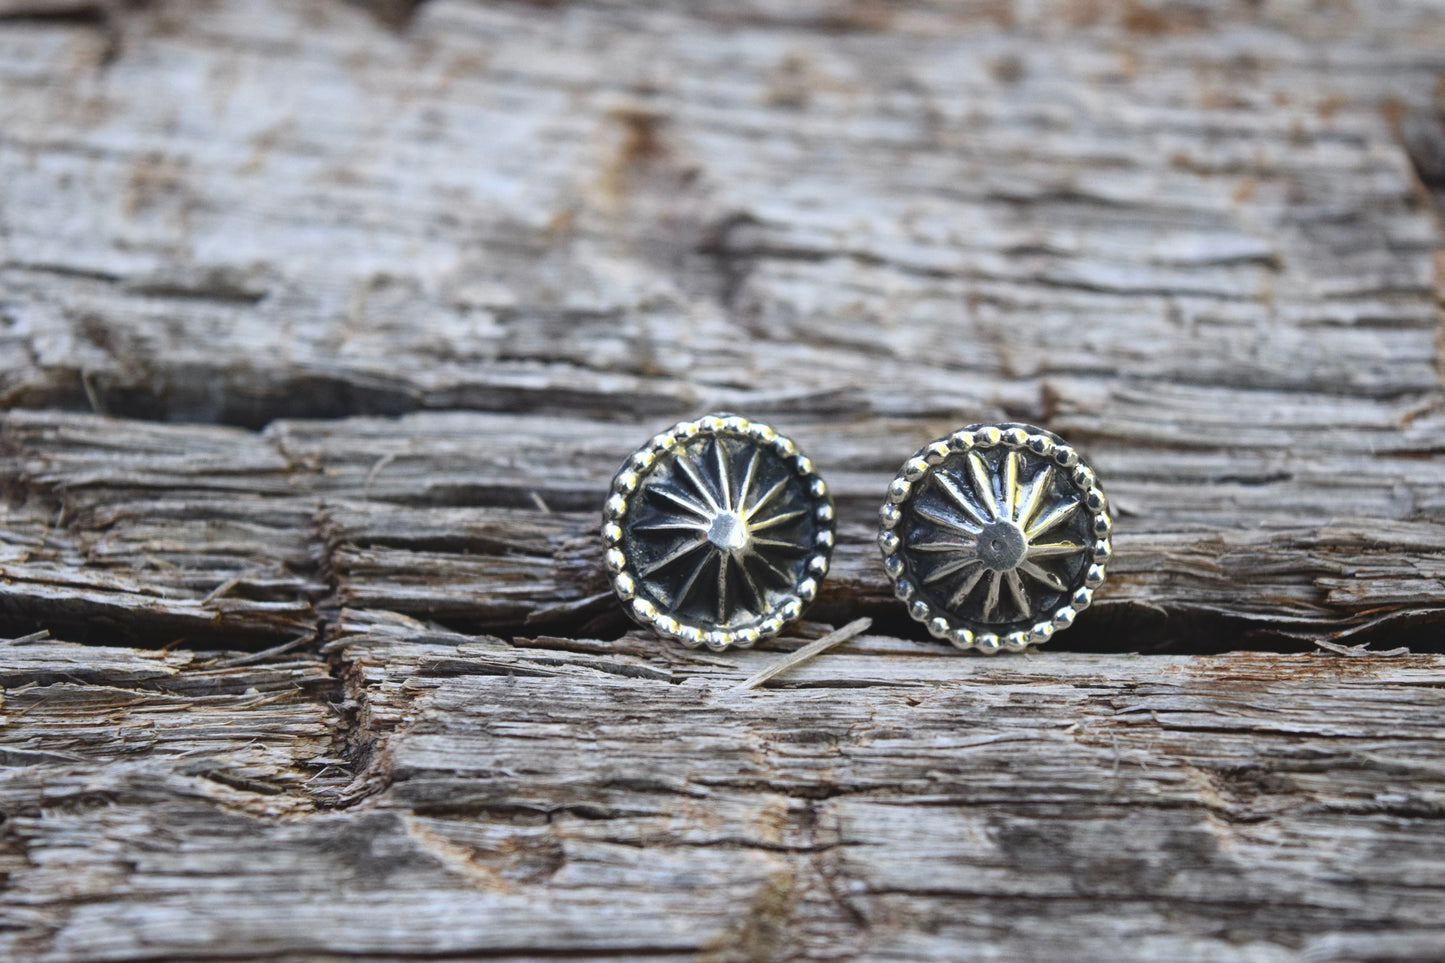 ANTIQUED CONCHO STUD EARRINGS FROM THE RODGERS COLLECTION